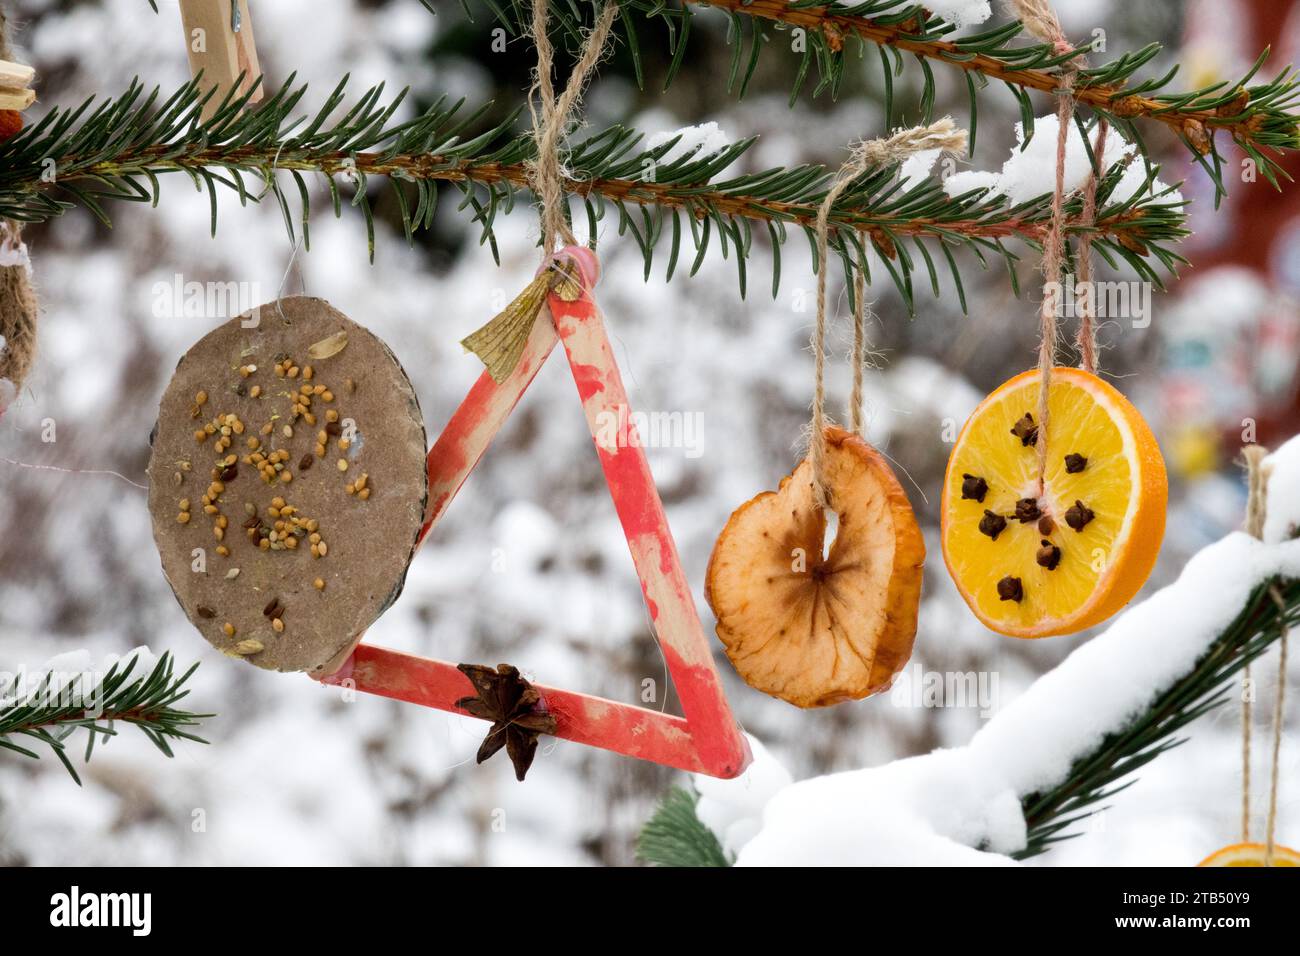 Homemade Christmas decorations hanging on the Christmas tree outside round orange slices and other decorations, fruits Stock Photo